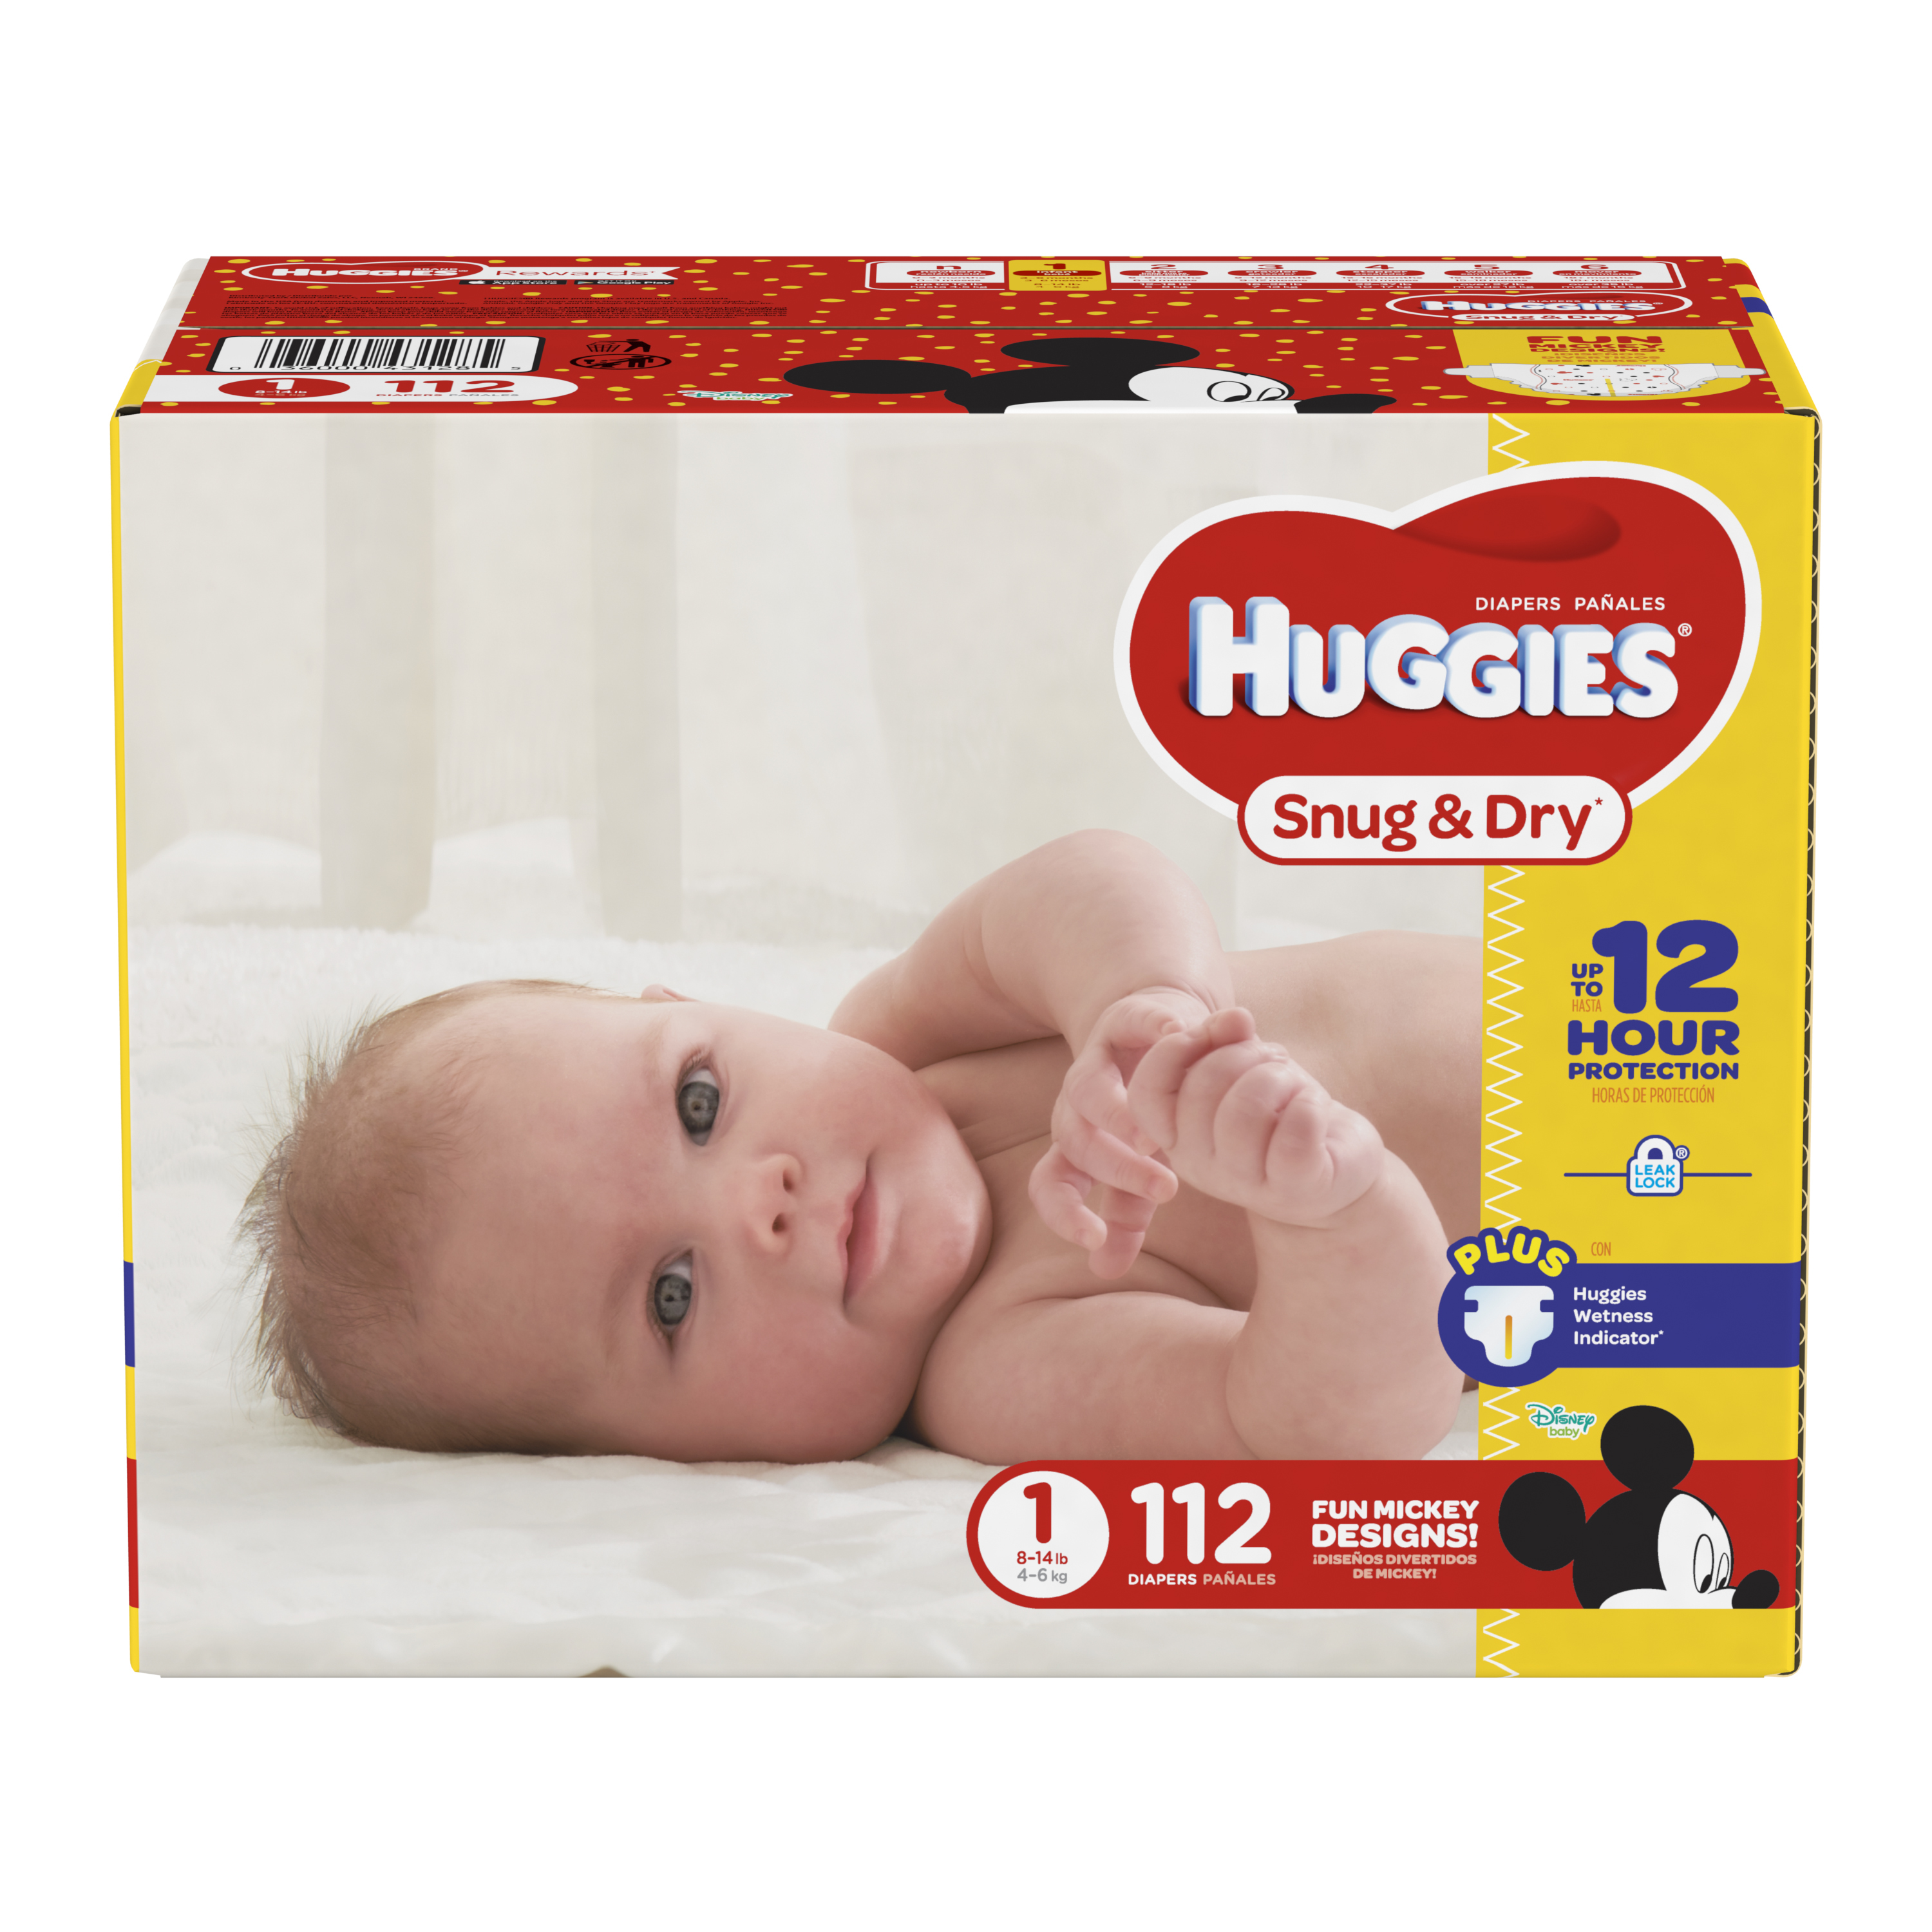 HUGGIES Snug & Dry Diapers, Size 1, 112 Count, BIG PACK (Packaging May Vary) - image 1 of 10